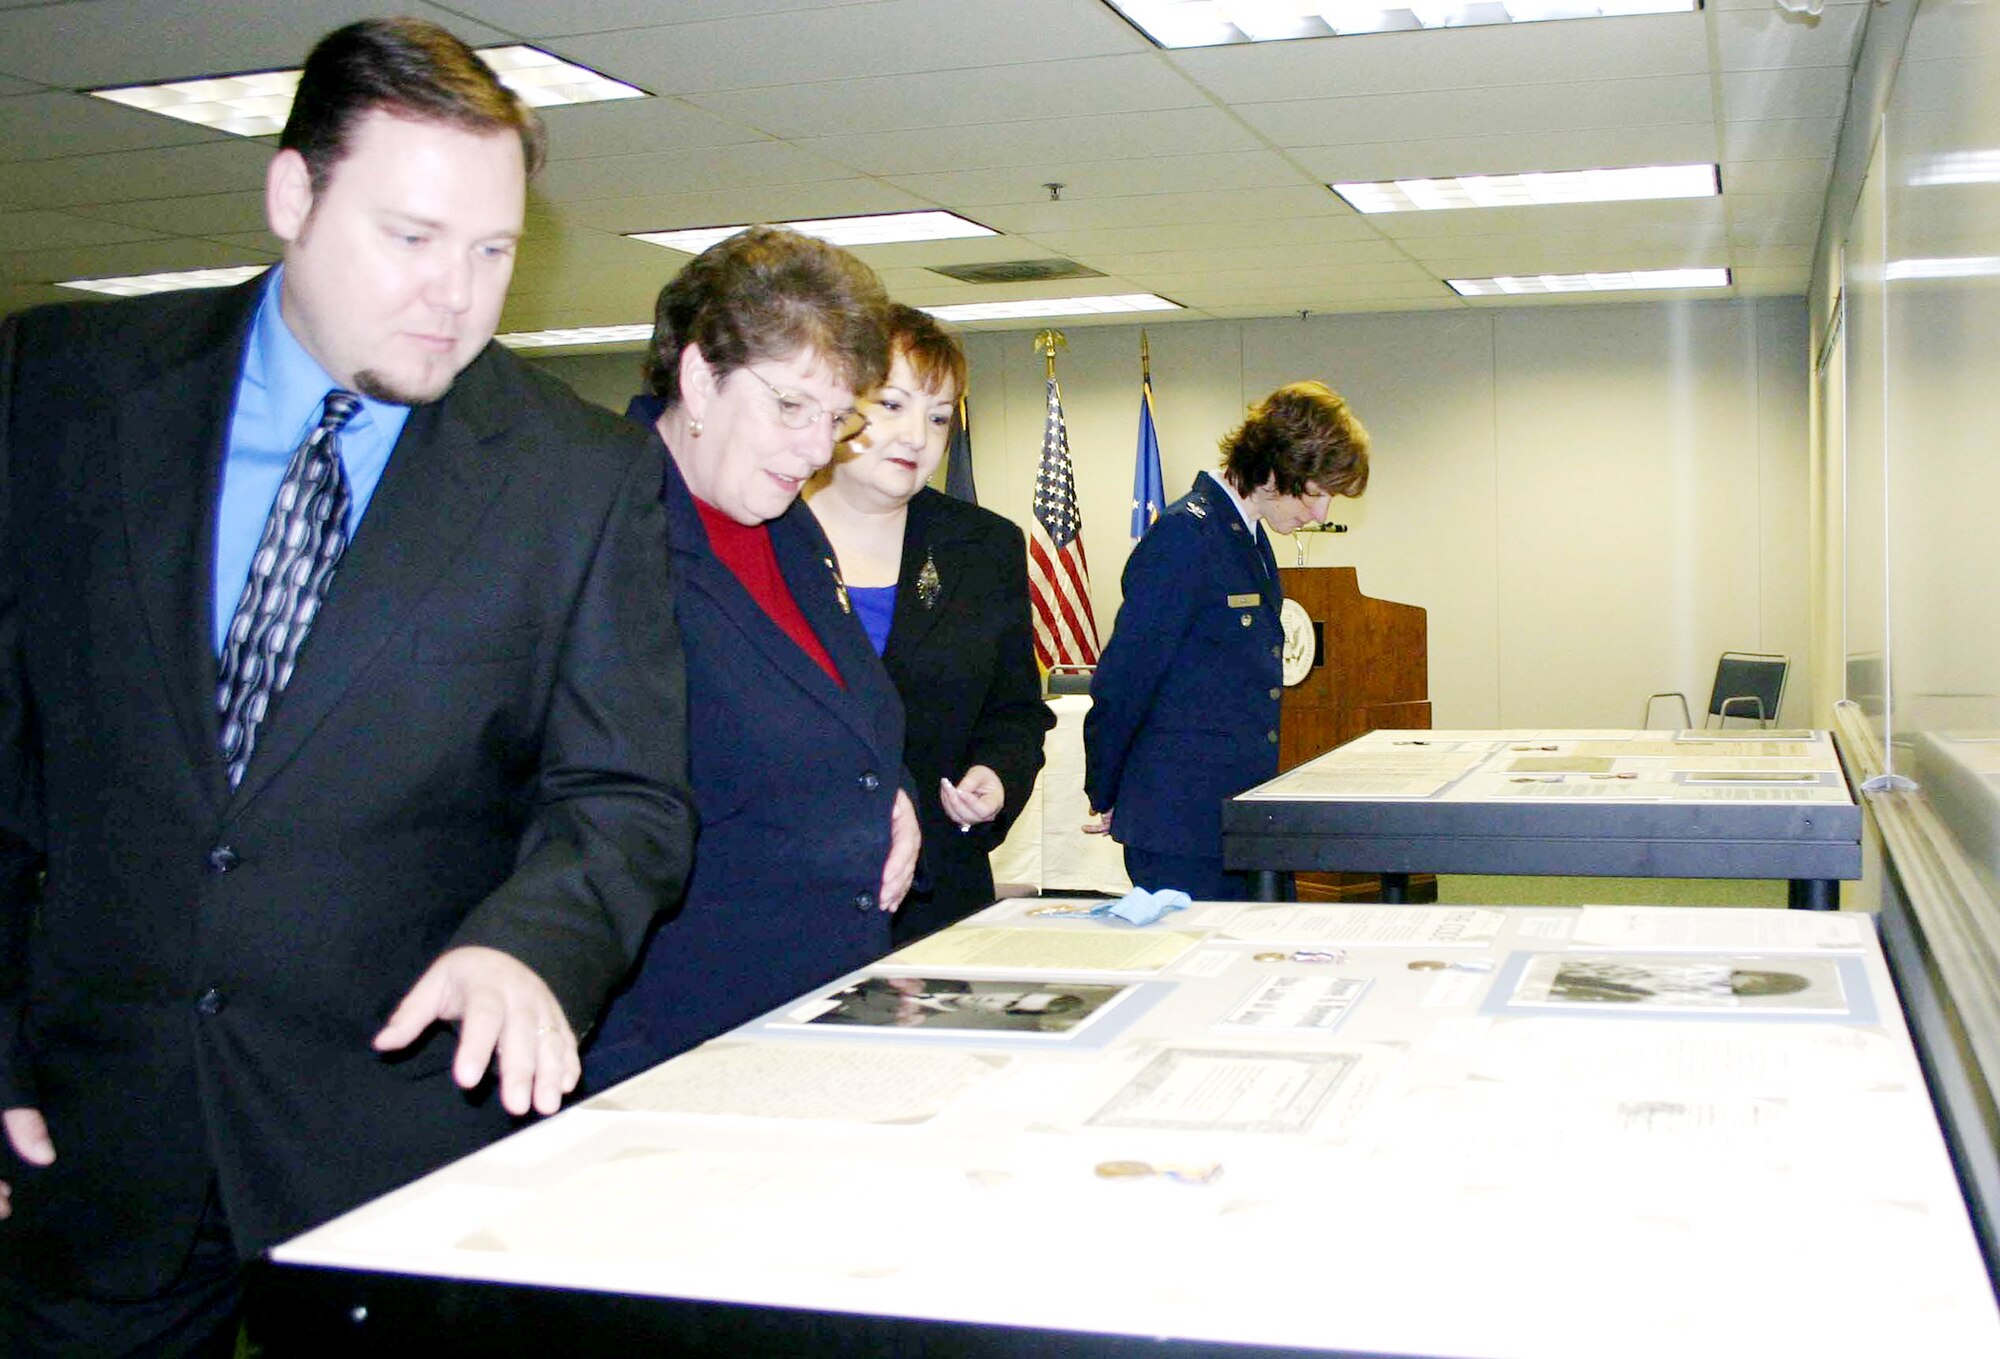 Mike Green (left to right), Jo Hogue, Barbara Duggan and Col. Julie Robel review some of the original military personnel files of Air Force pioneers on display at the National Personnel Records Center during a ceremony Nov. 18, 2009 in St. Louis. The ceremony marked the historic transfer of ownership of approximately 177,000 official military personnel files from the Air Force to the National Archives and Records Administration. (U.S. Air Force photo/Daniel P. Elkins)